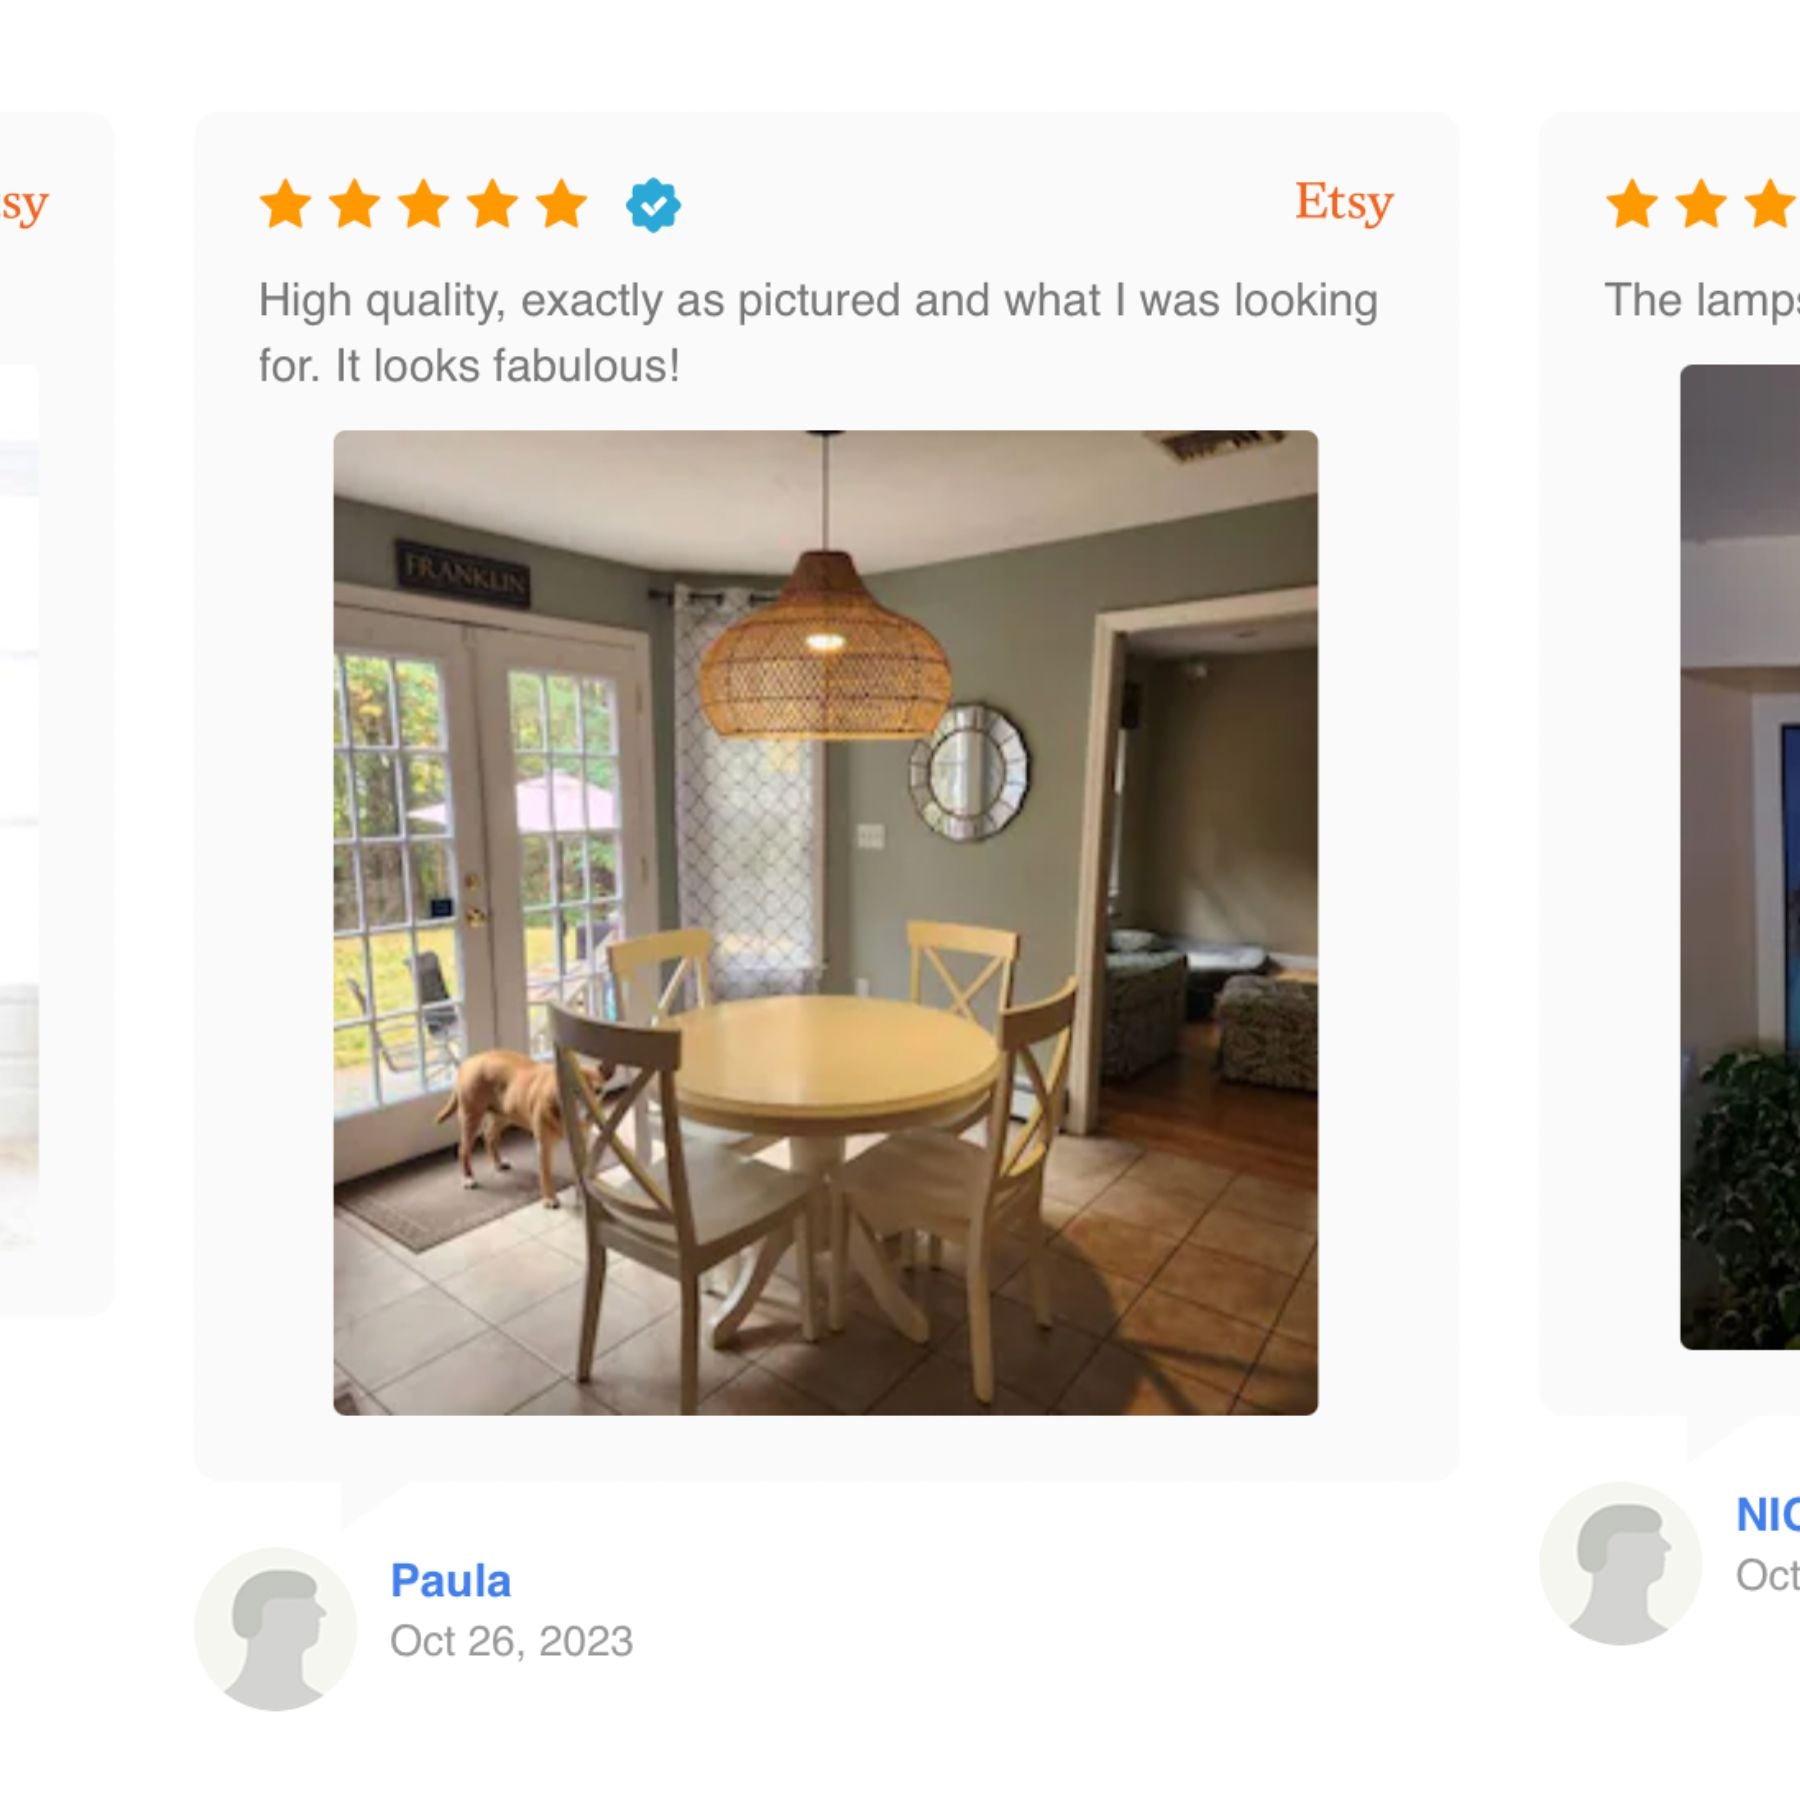 Researching reviews and feedback from other customers can help you determine if the product fits your homes aesthetic and style